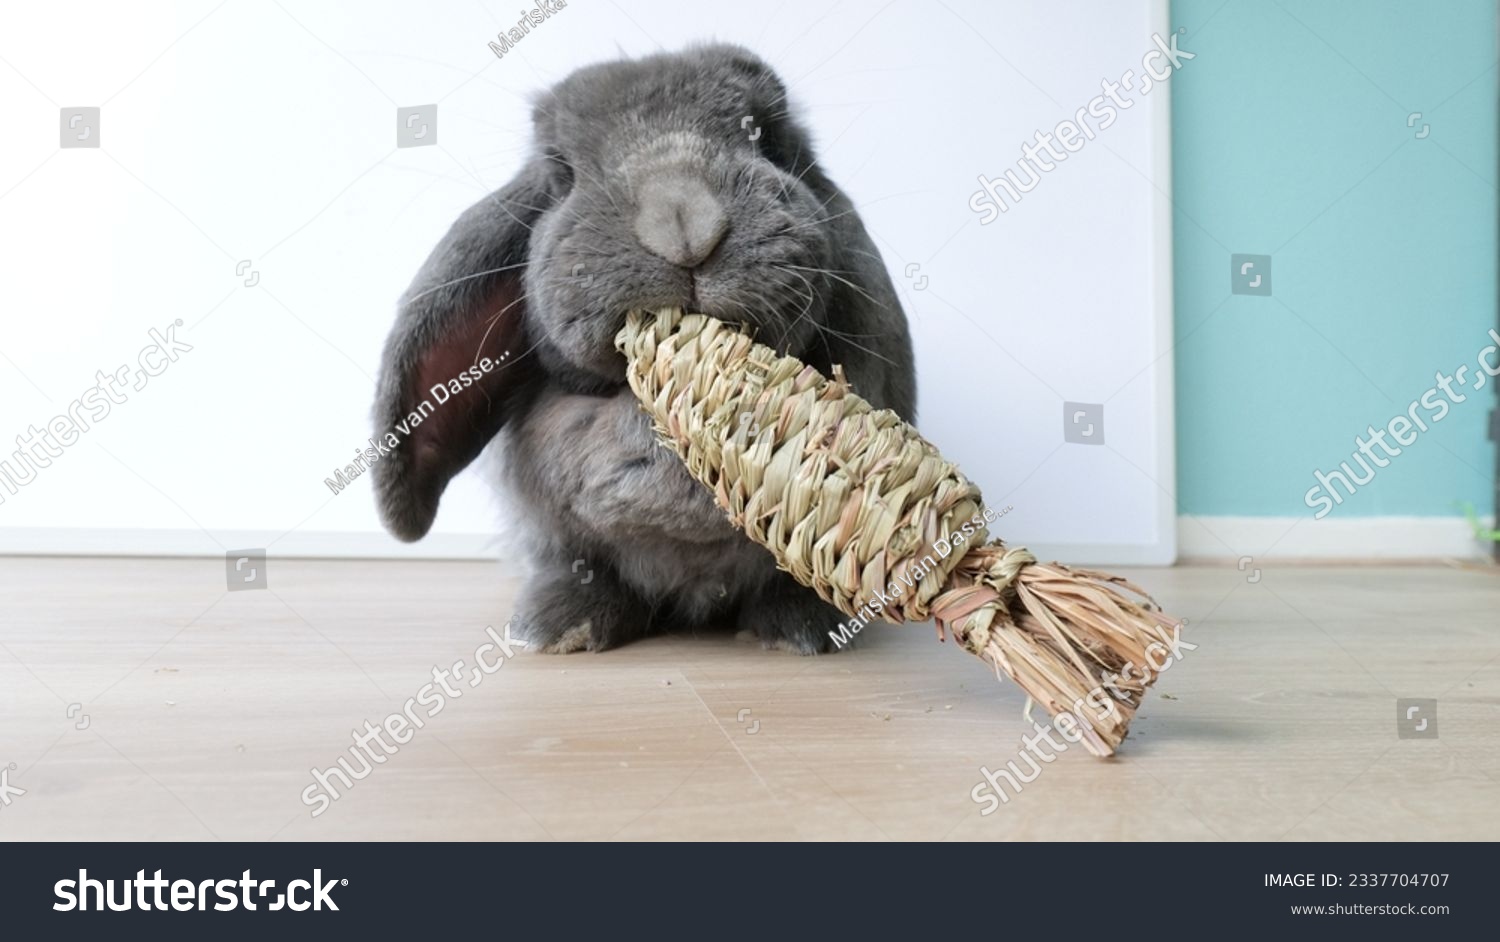 Cute grey french lop bunny rabbit chewing on a chewing toy #2337704707